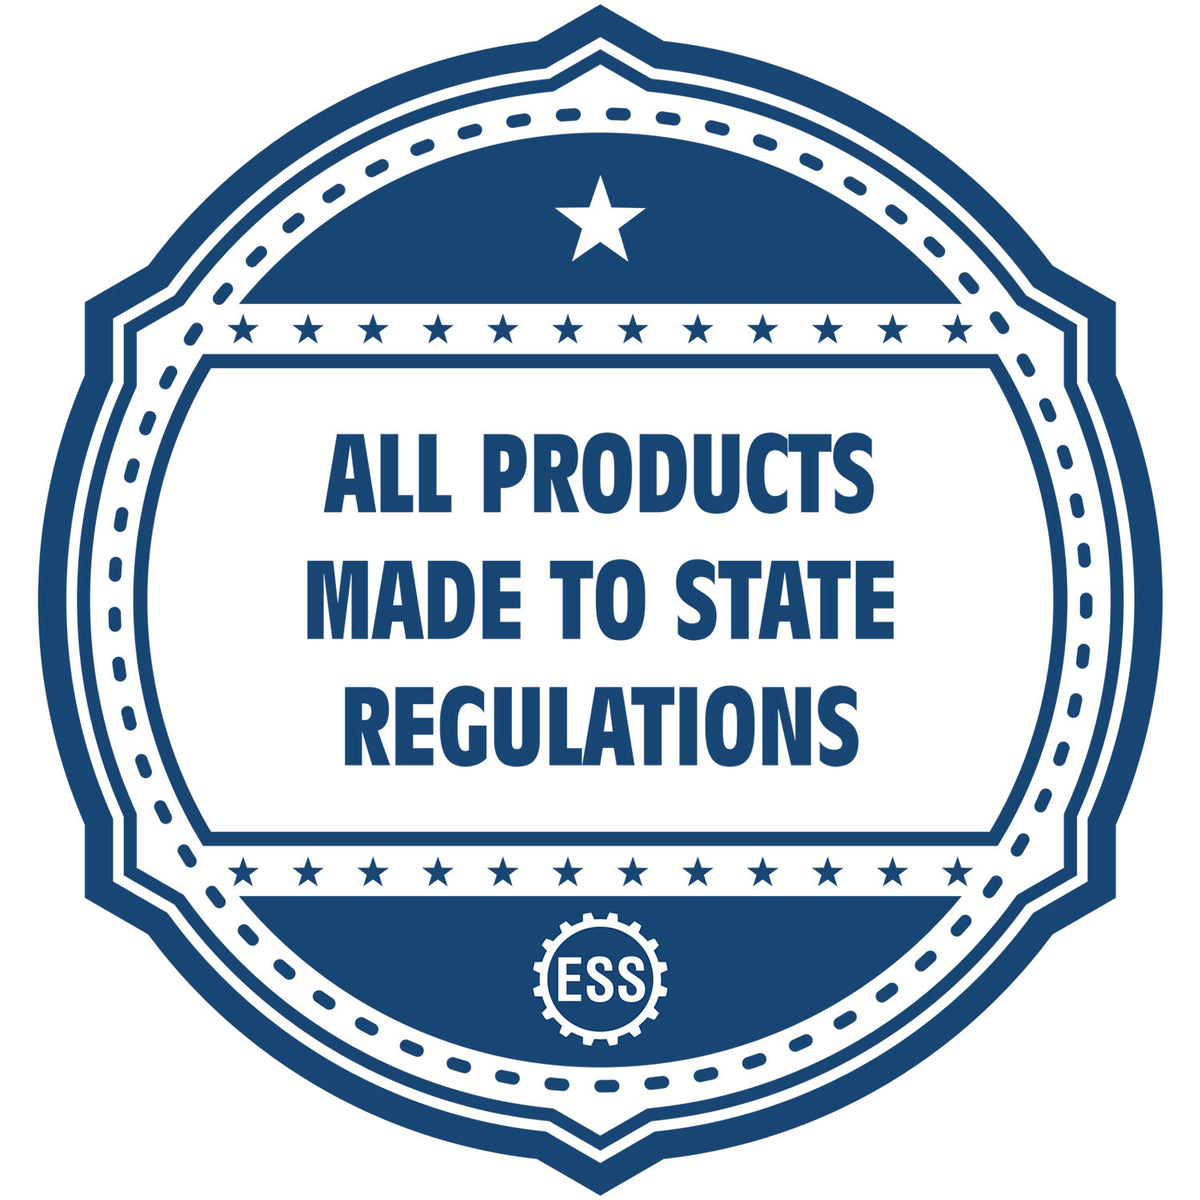 An icon or badge element for the Slim Pre-Inked State Seal Notary Stamp for Massachusetts showing that this product is made in compliance with state regulations.